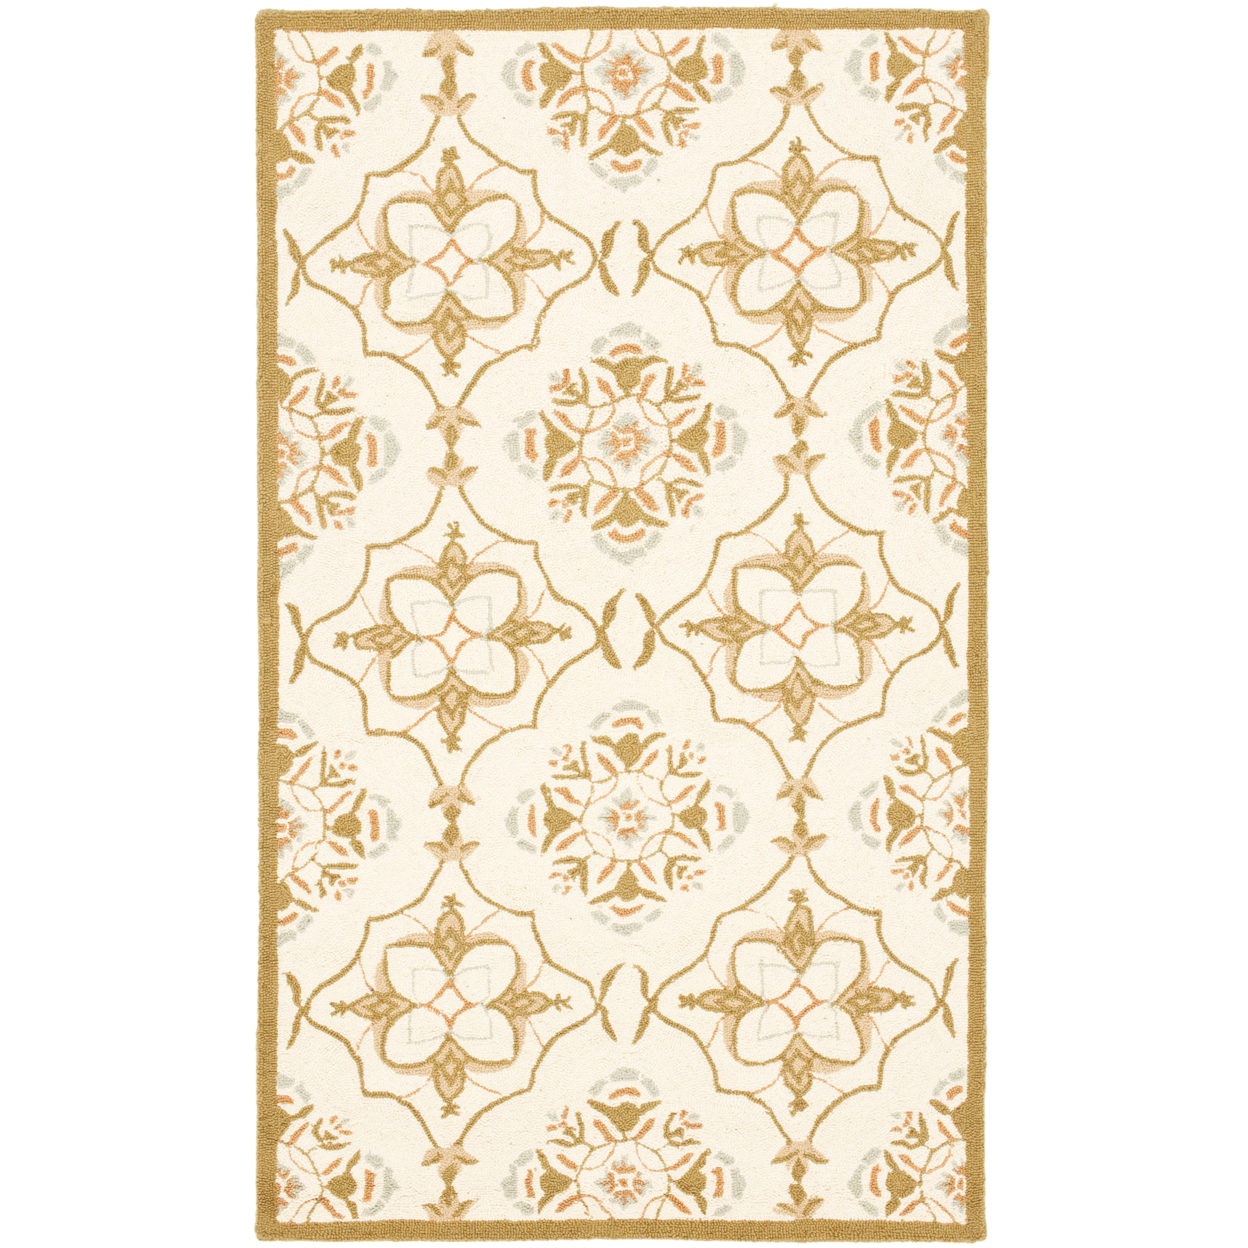 SAFAVIEH Chelsea HK376A Hand-hooked Ivory / Green Rug - 2' 9 X 4' 9